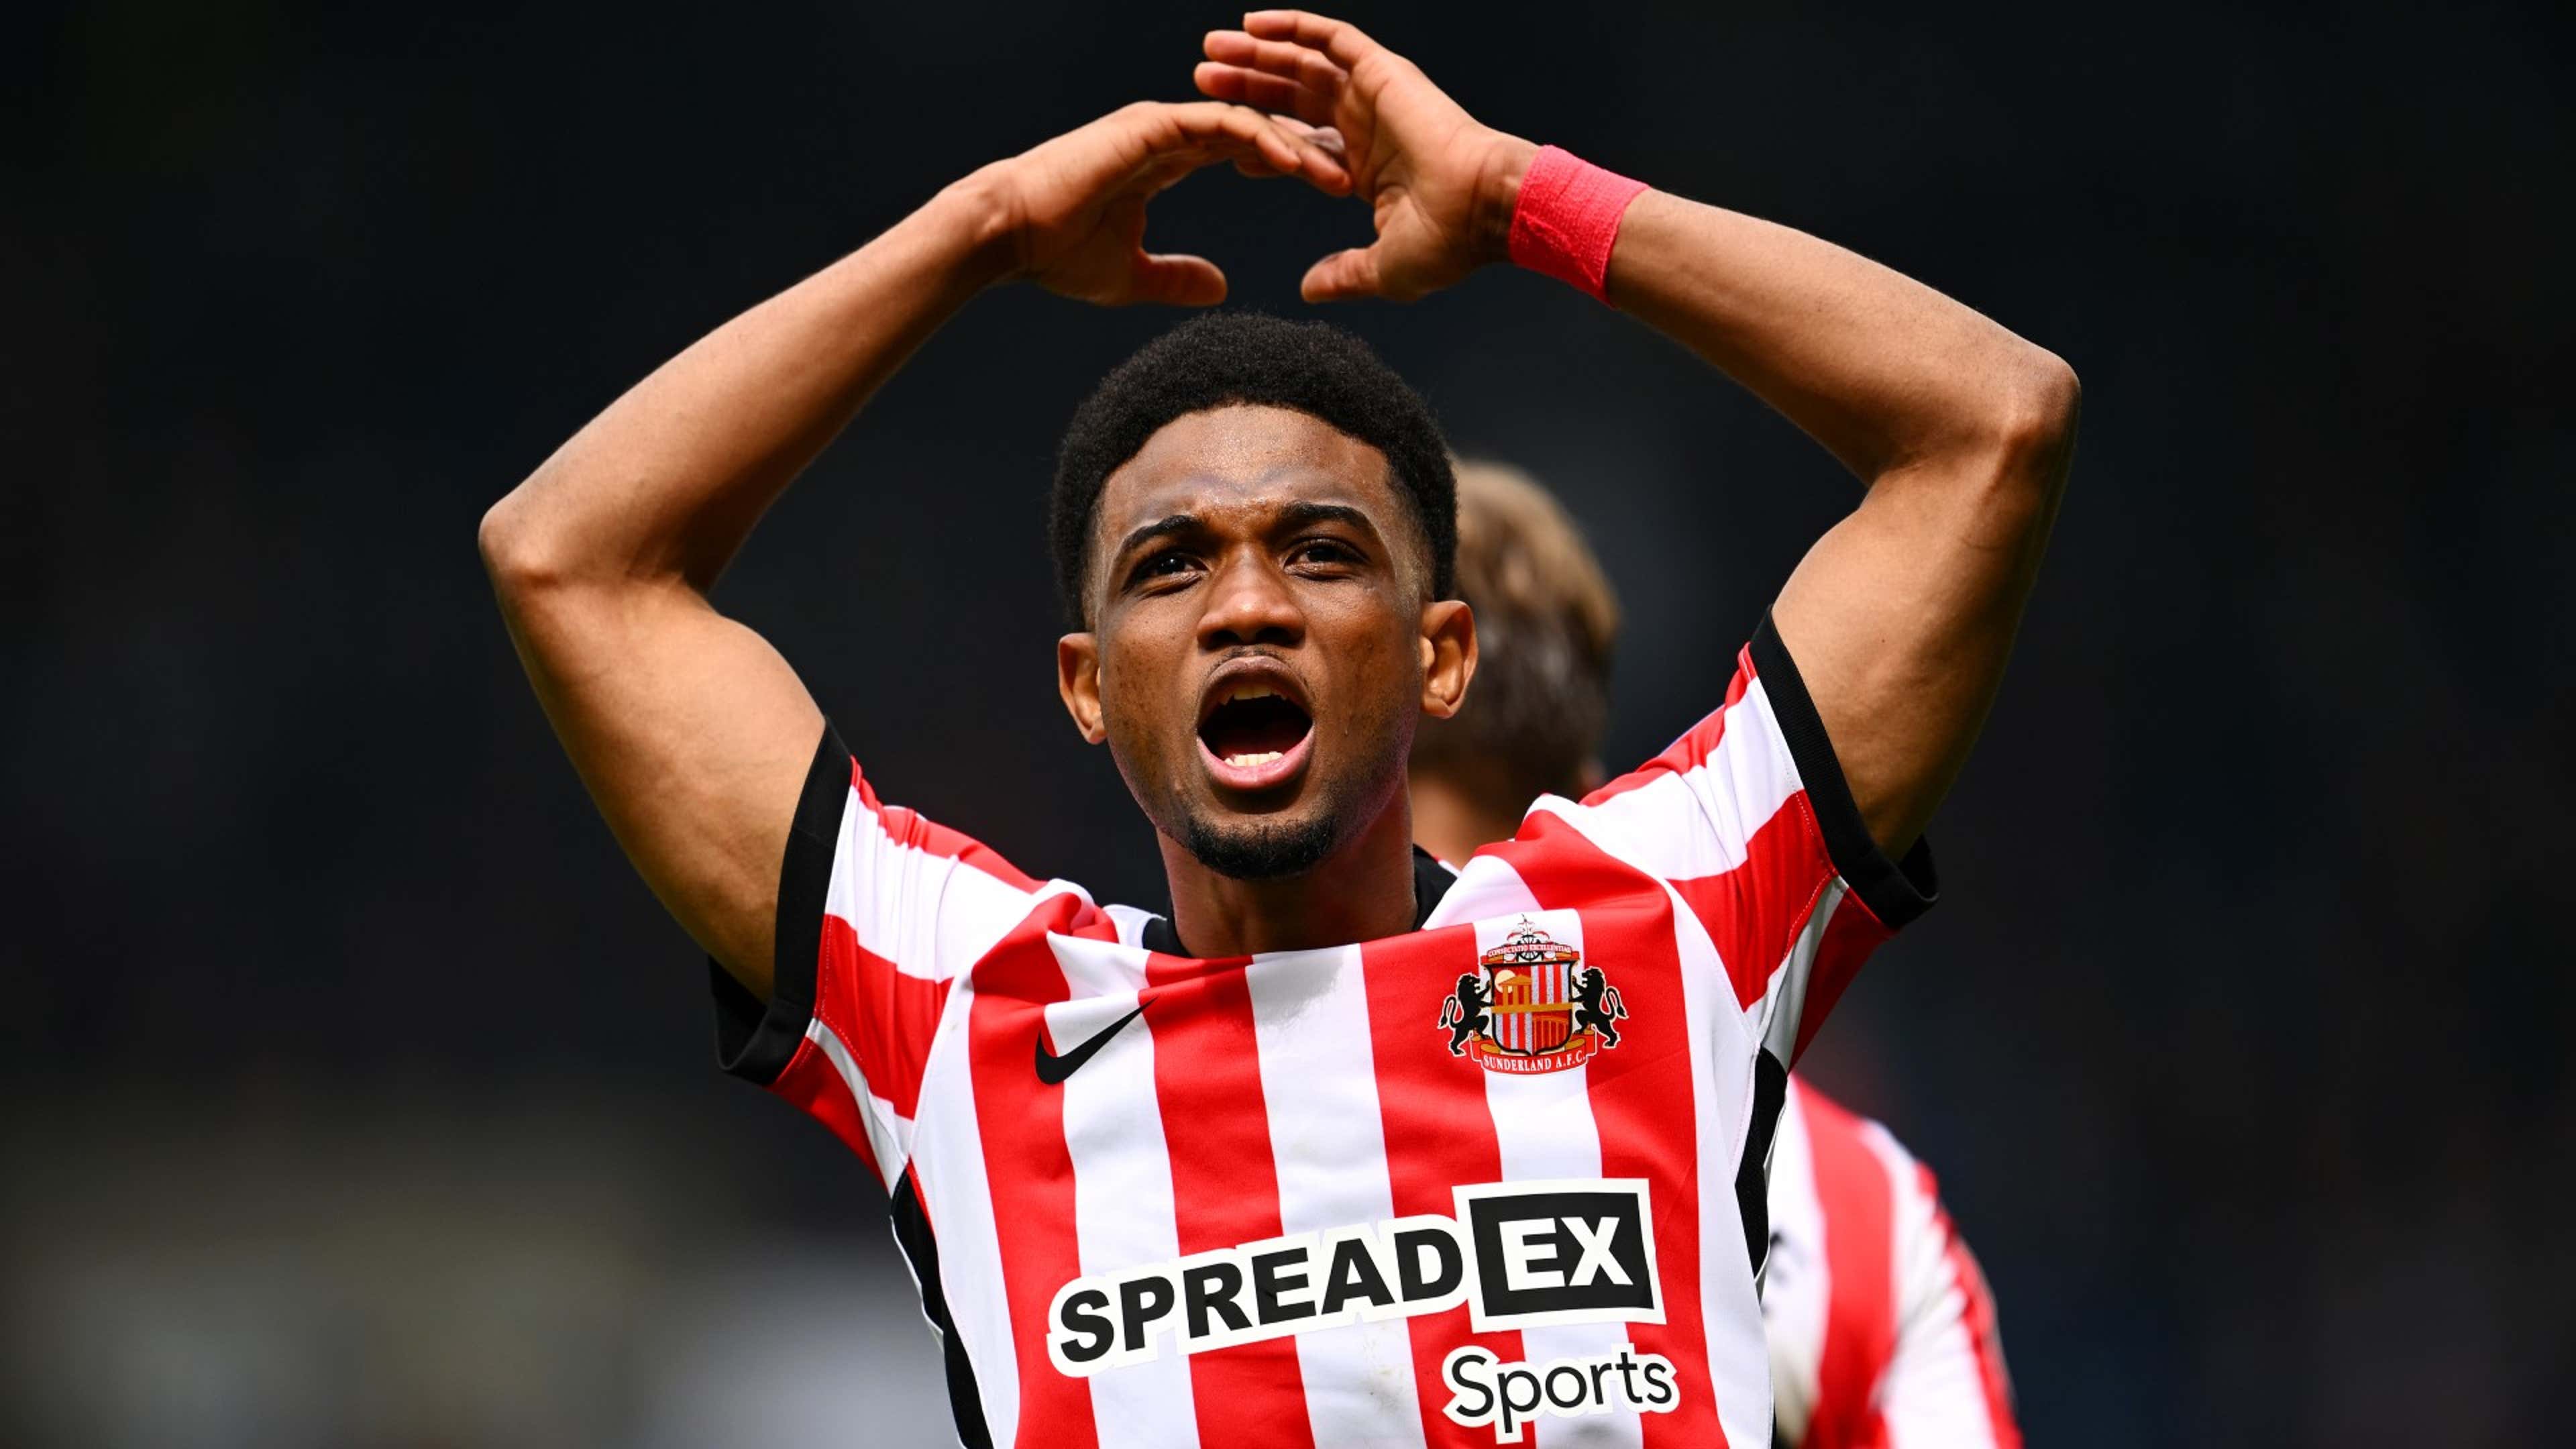 Man Utd loanee Amad Diallo scores stunning goal for Sunderland in play-off  semi-final to leave fans drooling at prospect of Alejandro Garnacho link-up  | Goal.com US